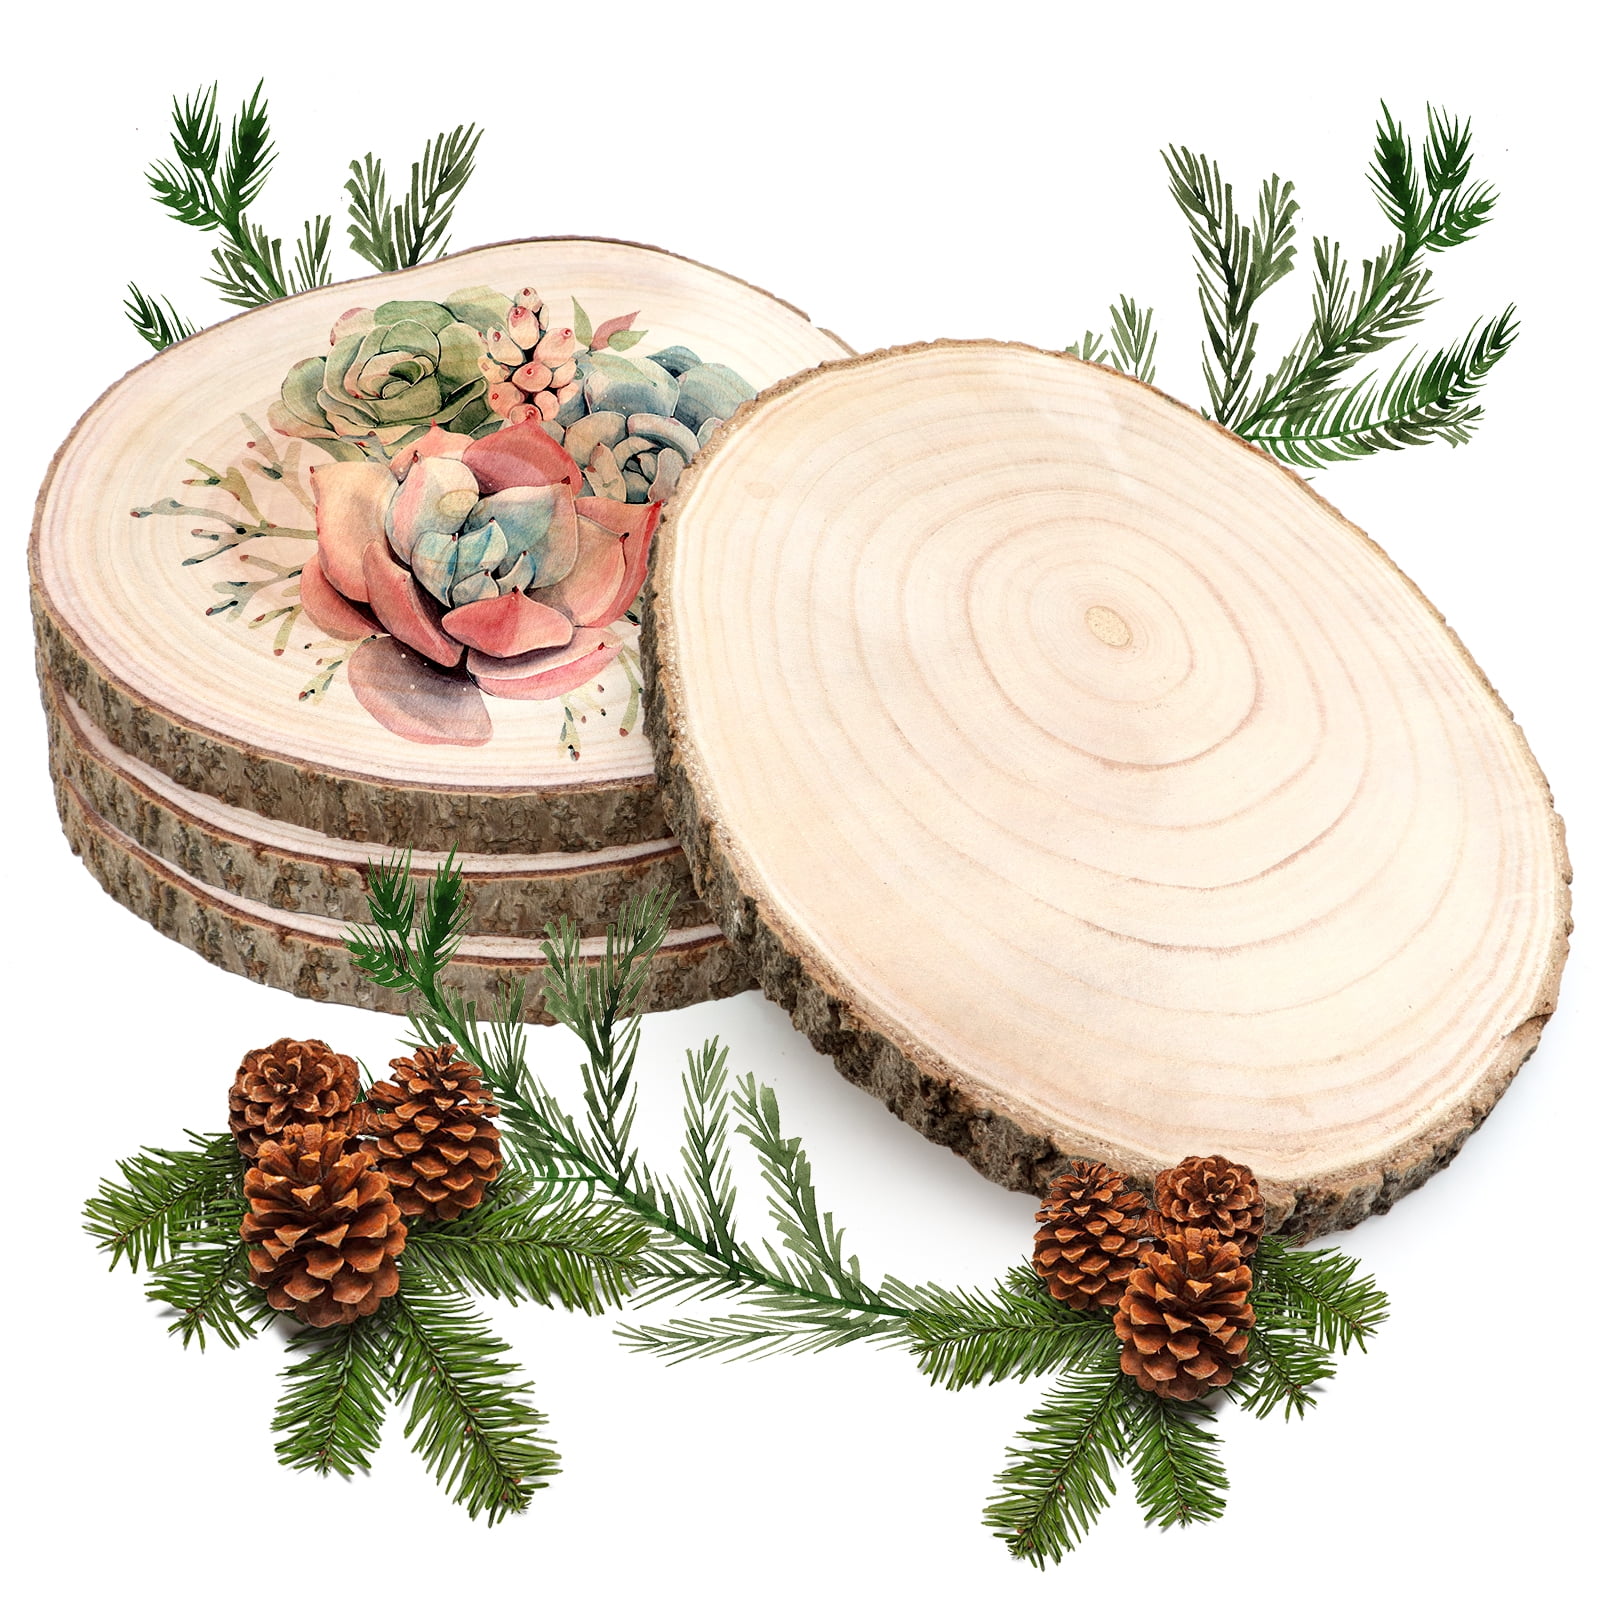 VEGCOO Wood Slices 4 Pcs7-8 Inches Unfinished Wood Rounds